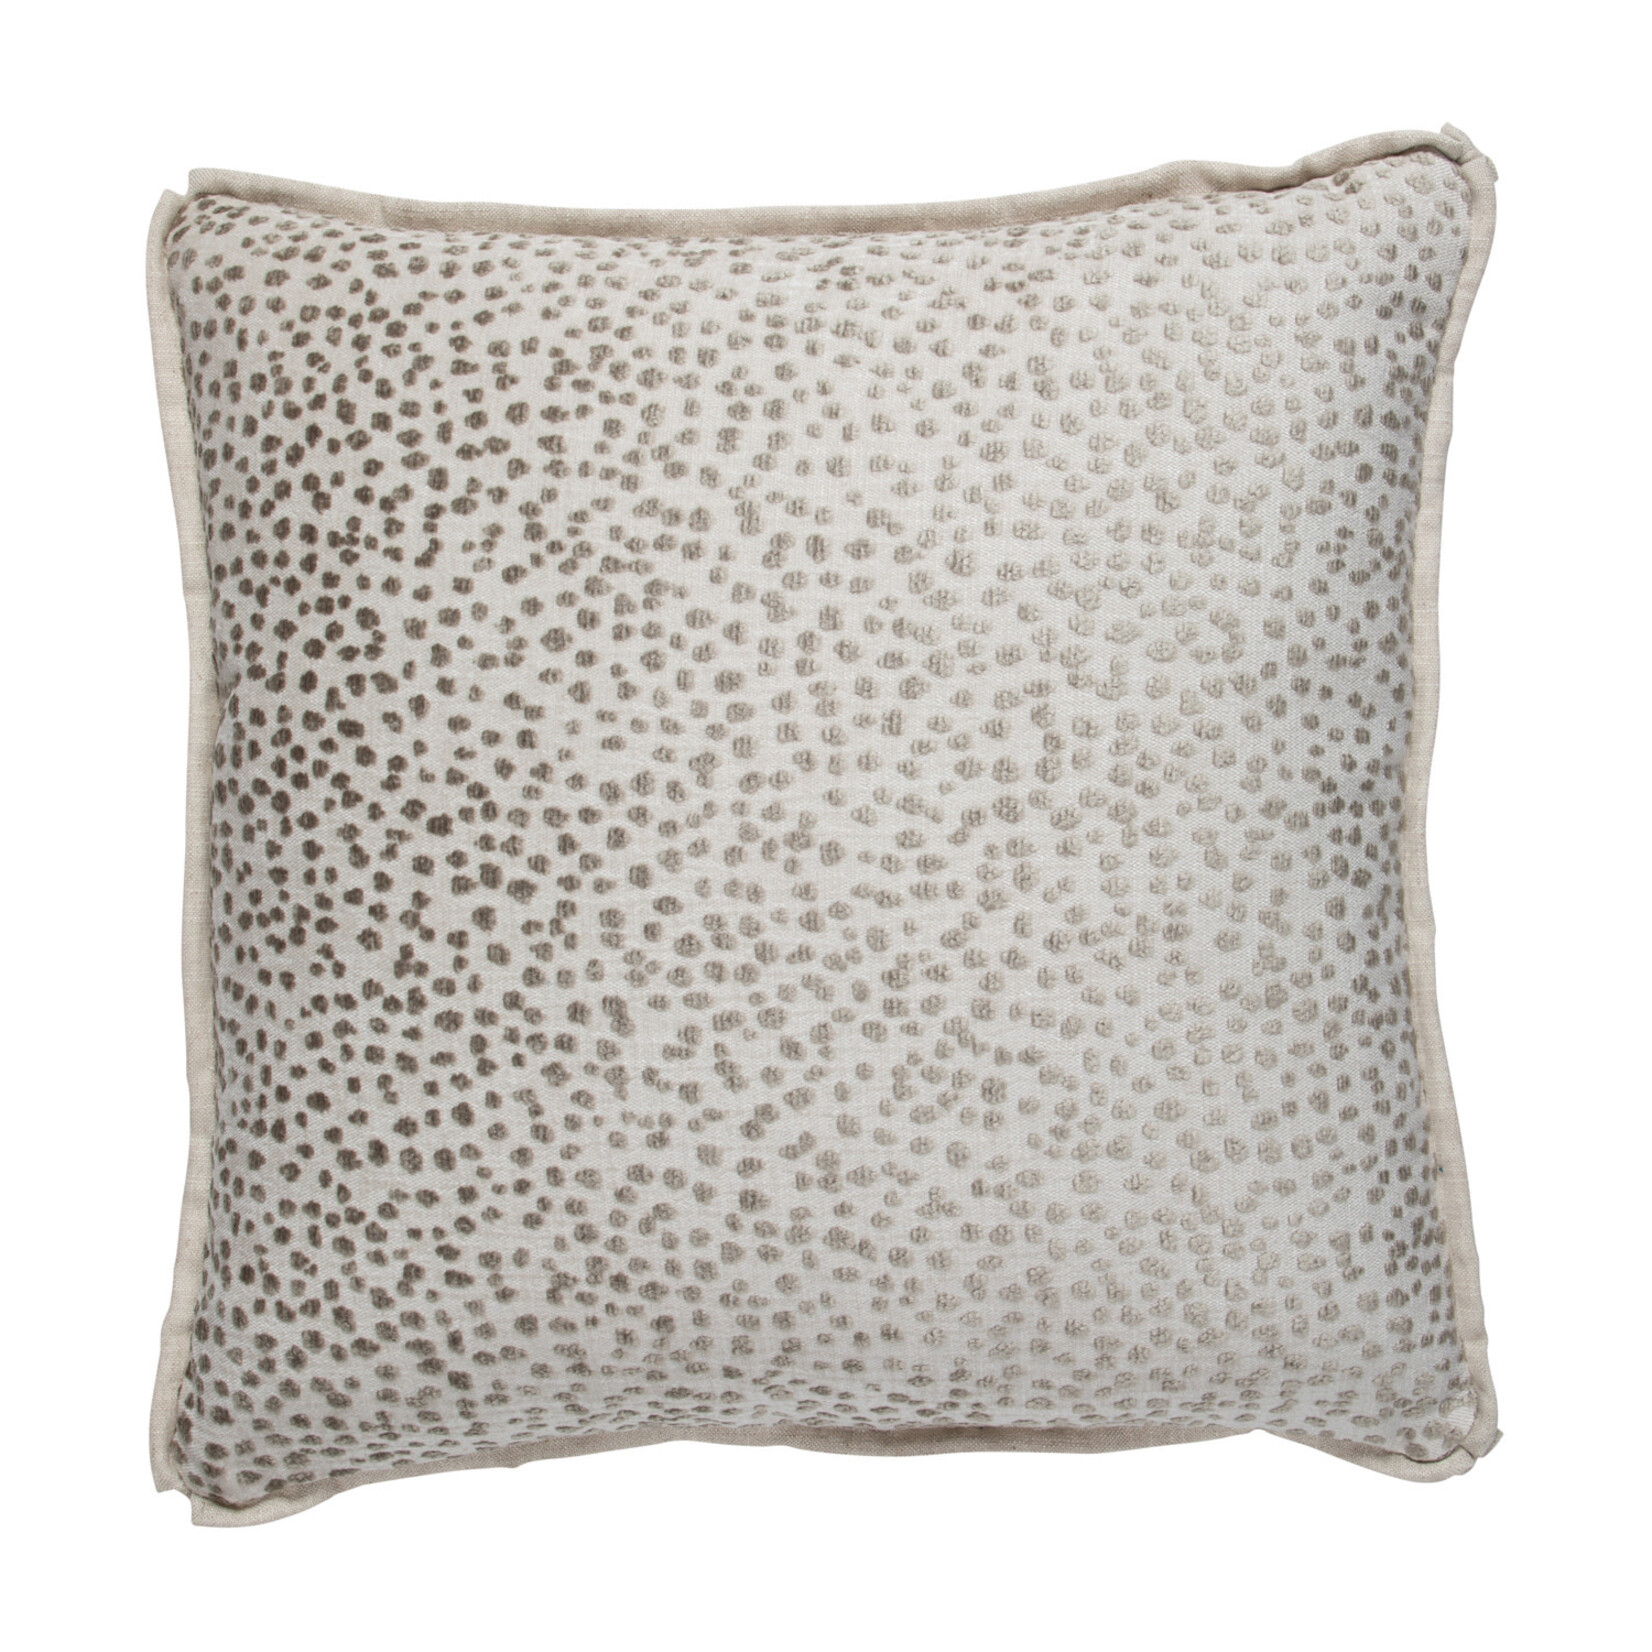 Gabby Lizette Pillow with Feather Insert 18x18